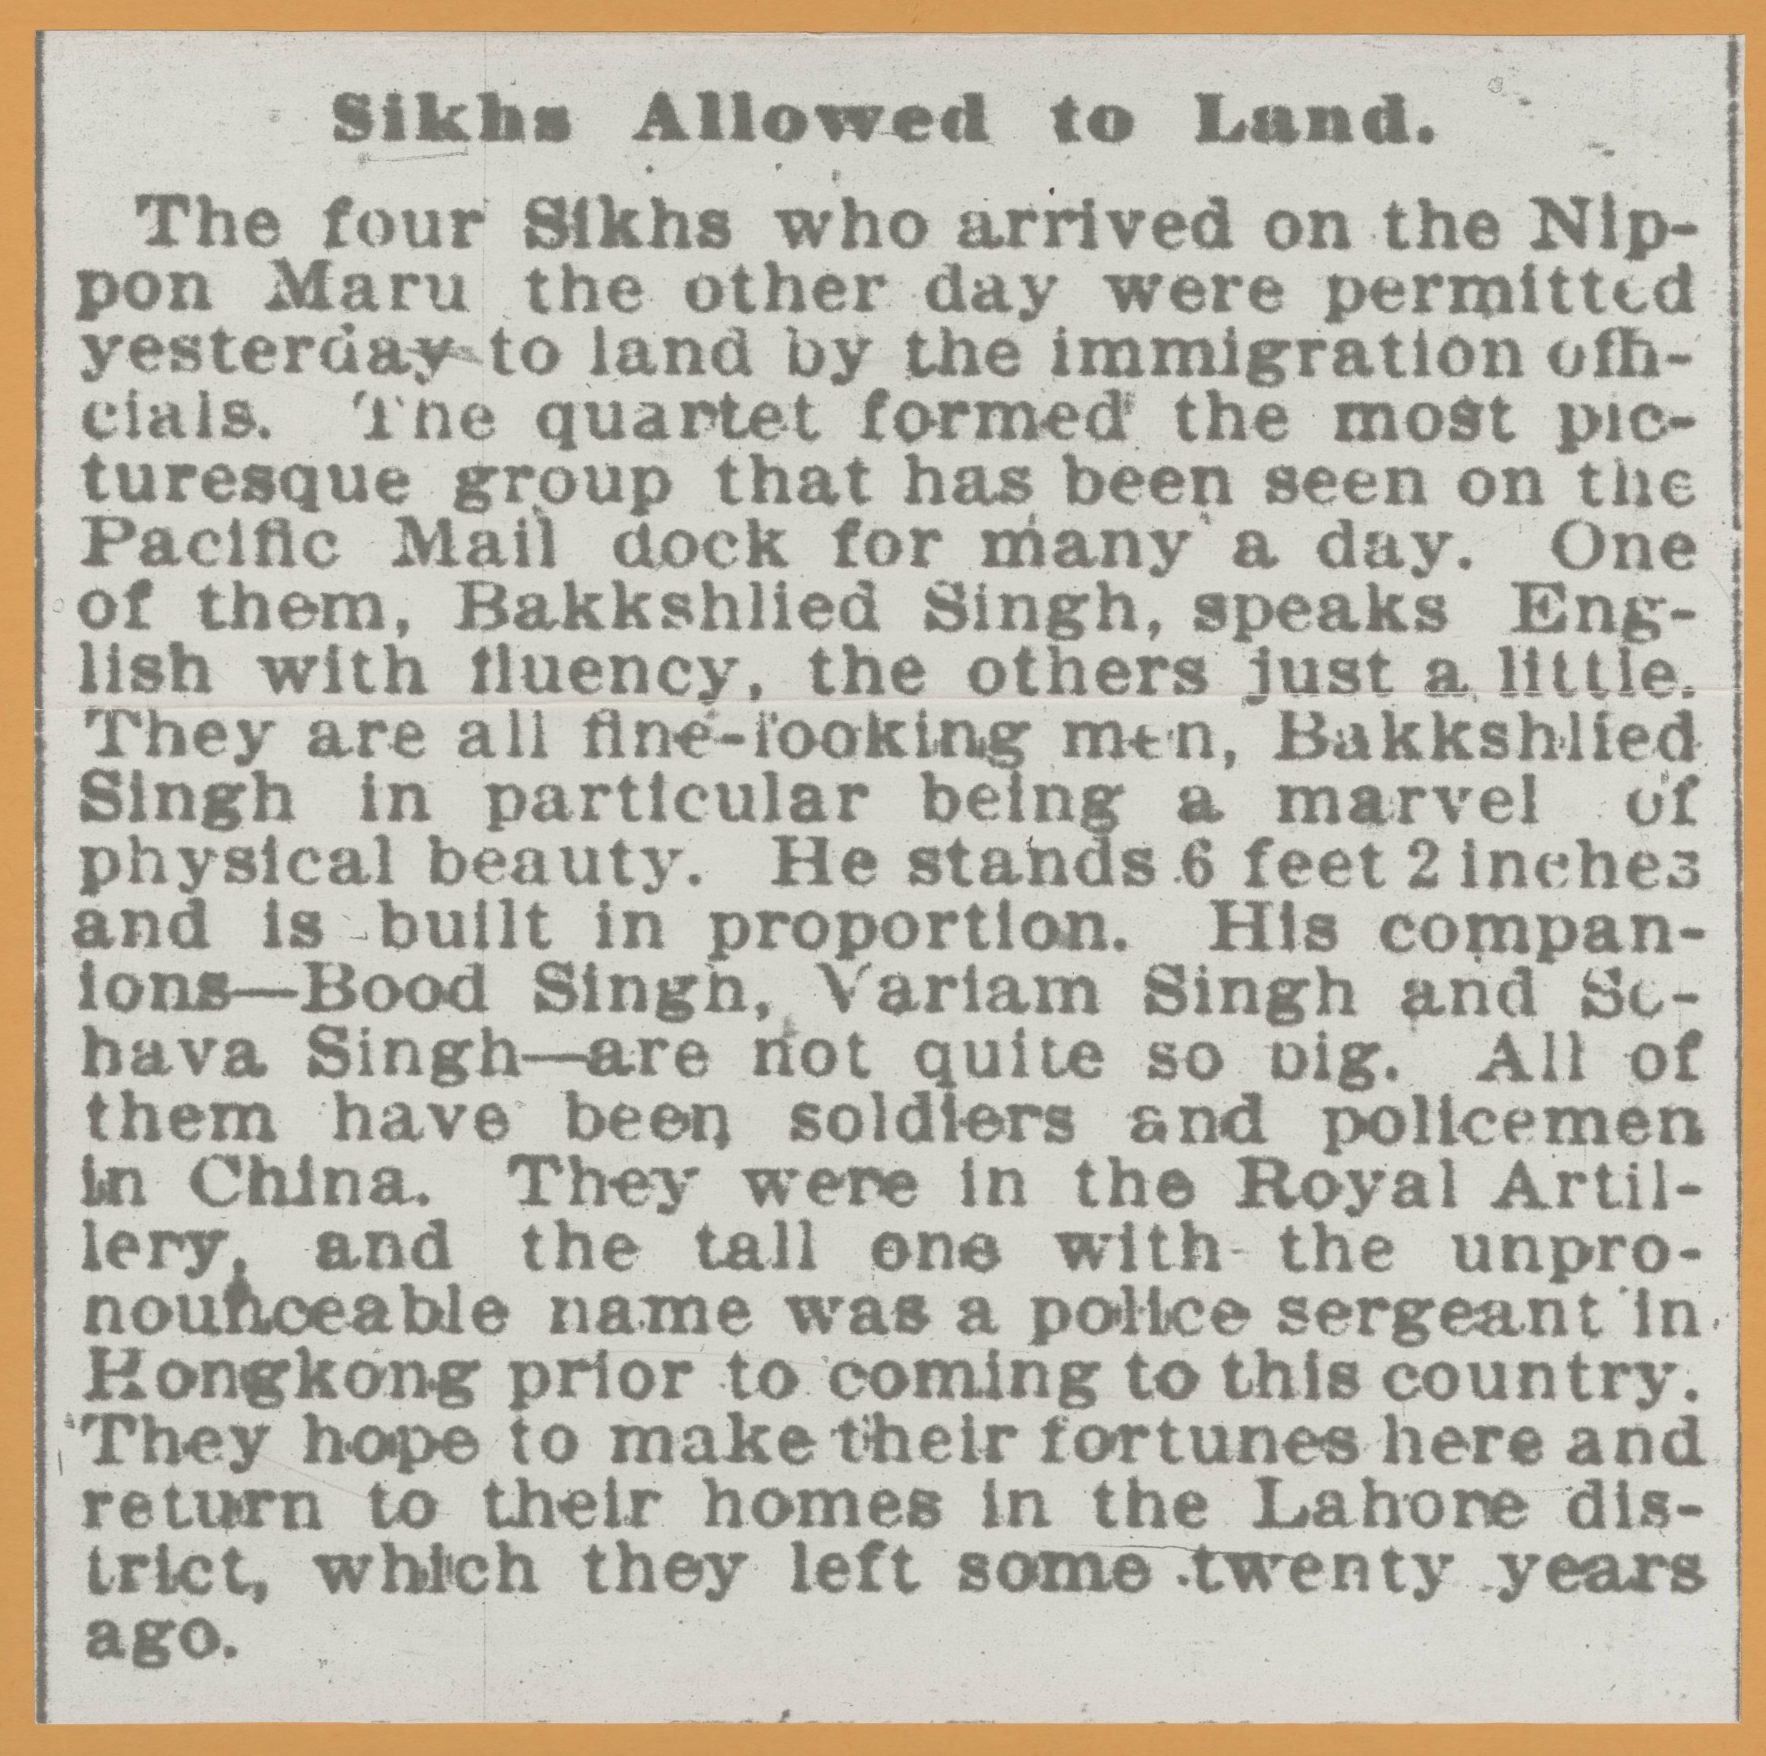 "Sikhs Allowed to Land"